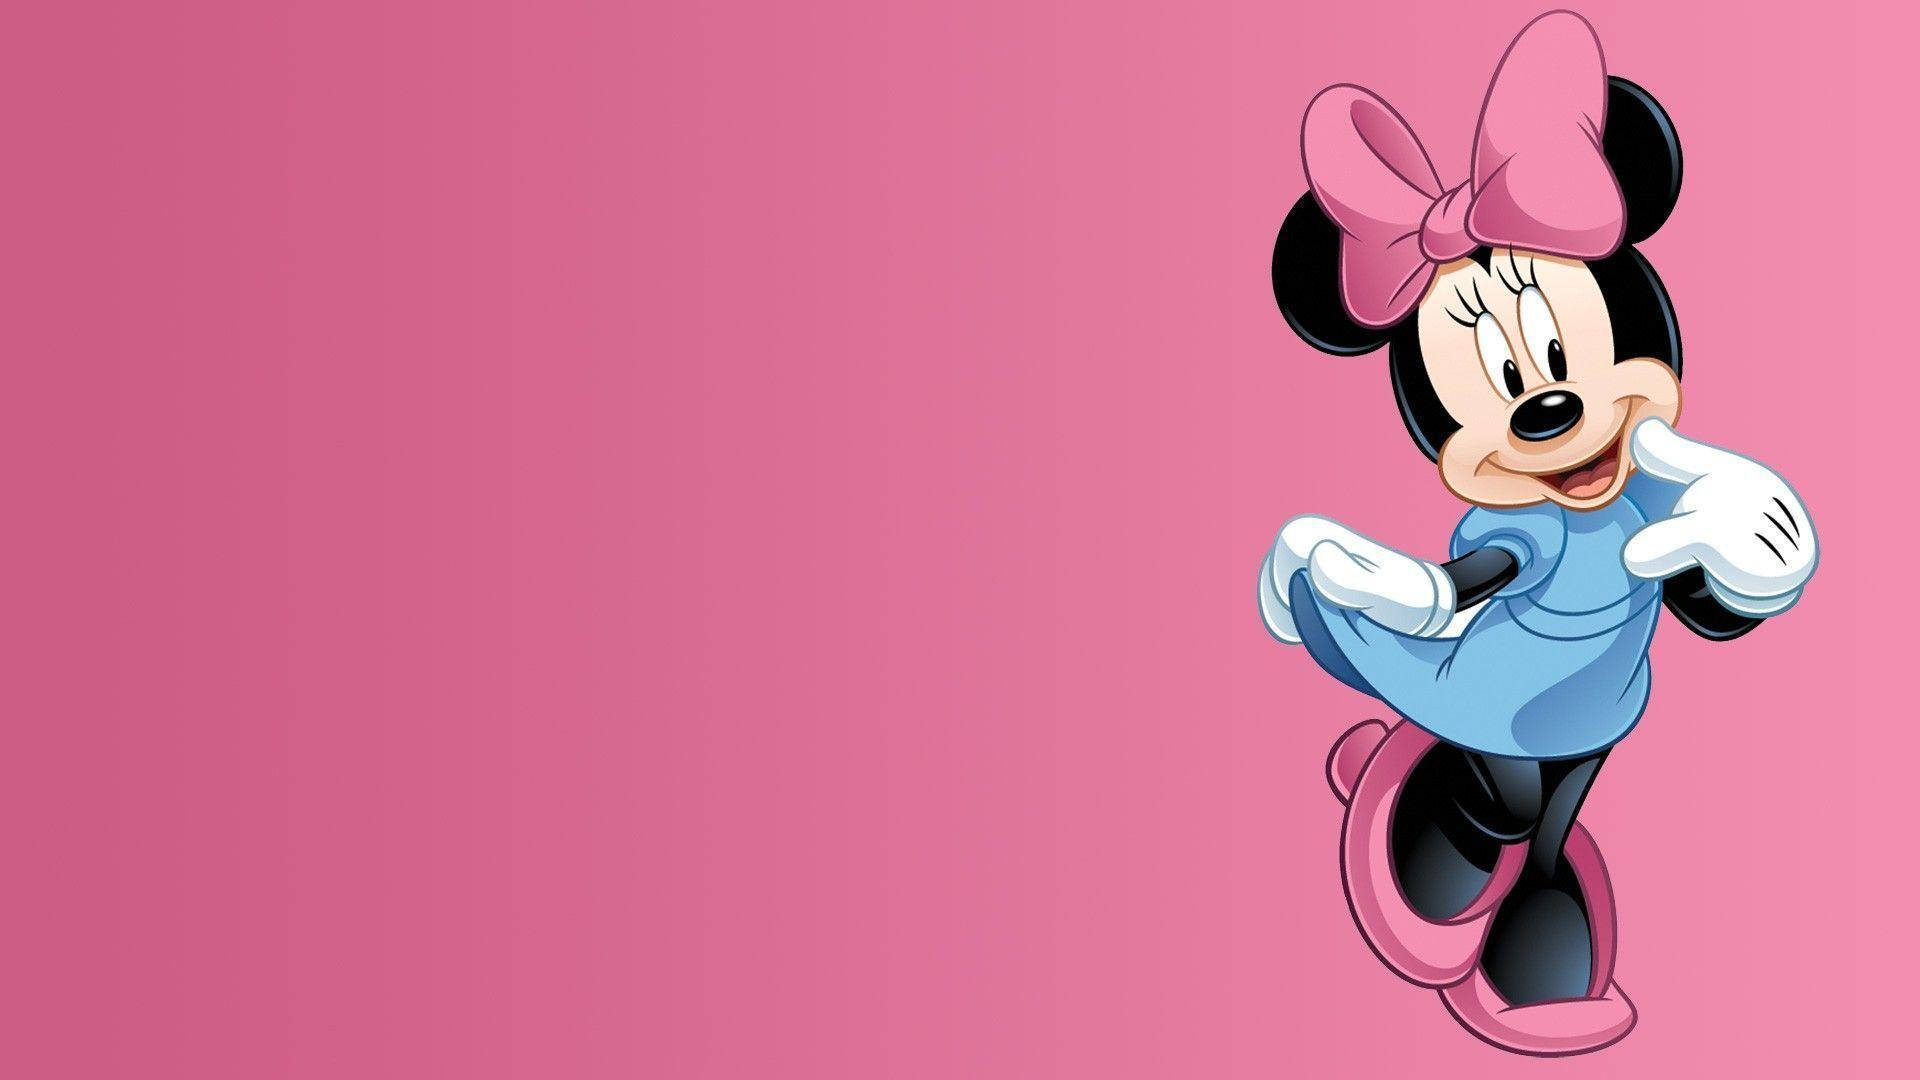 Minnie Mouse In Cute Pose Background